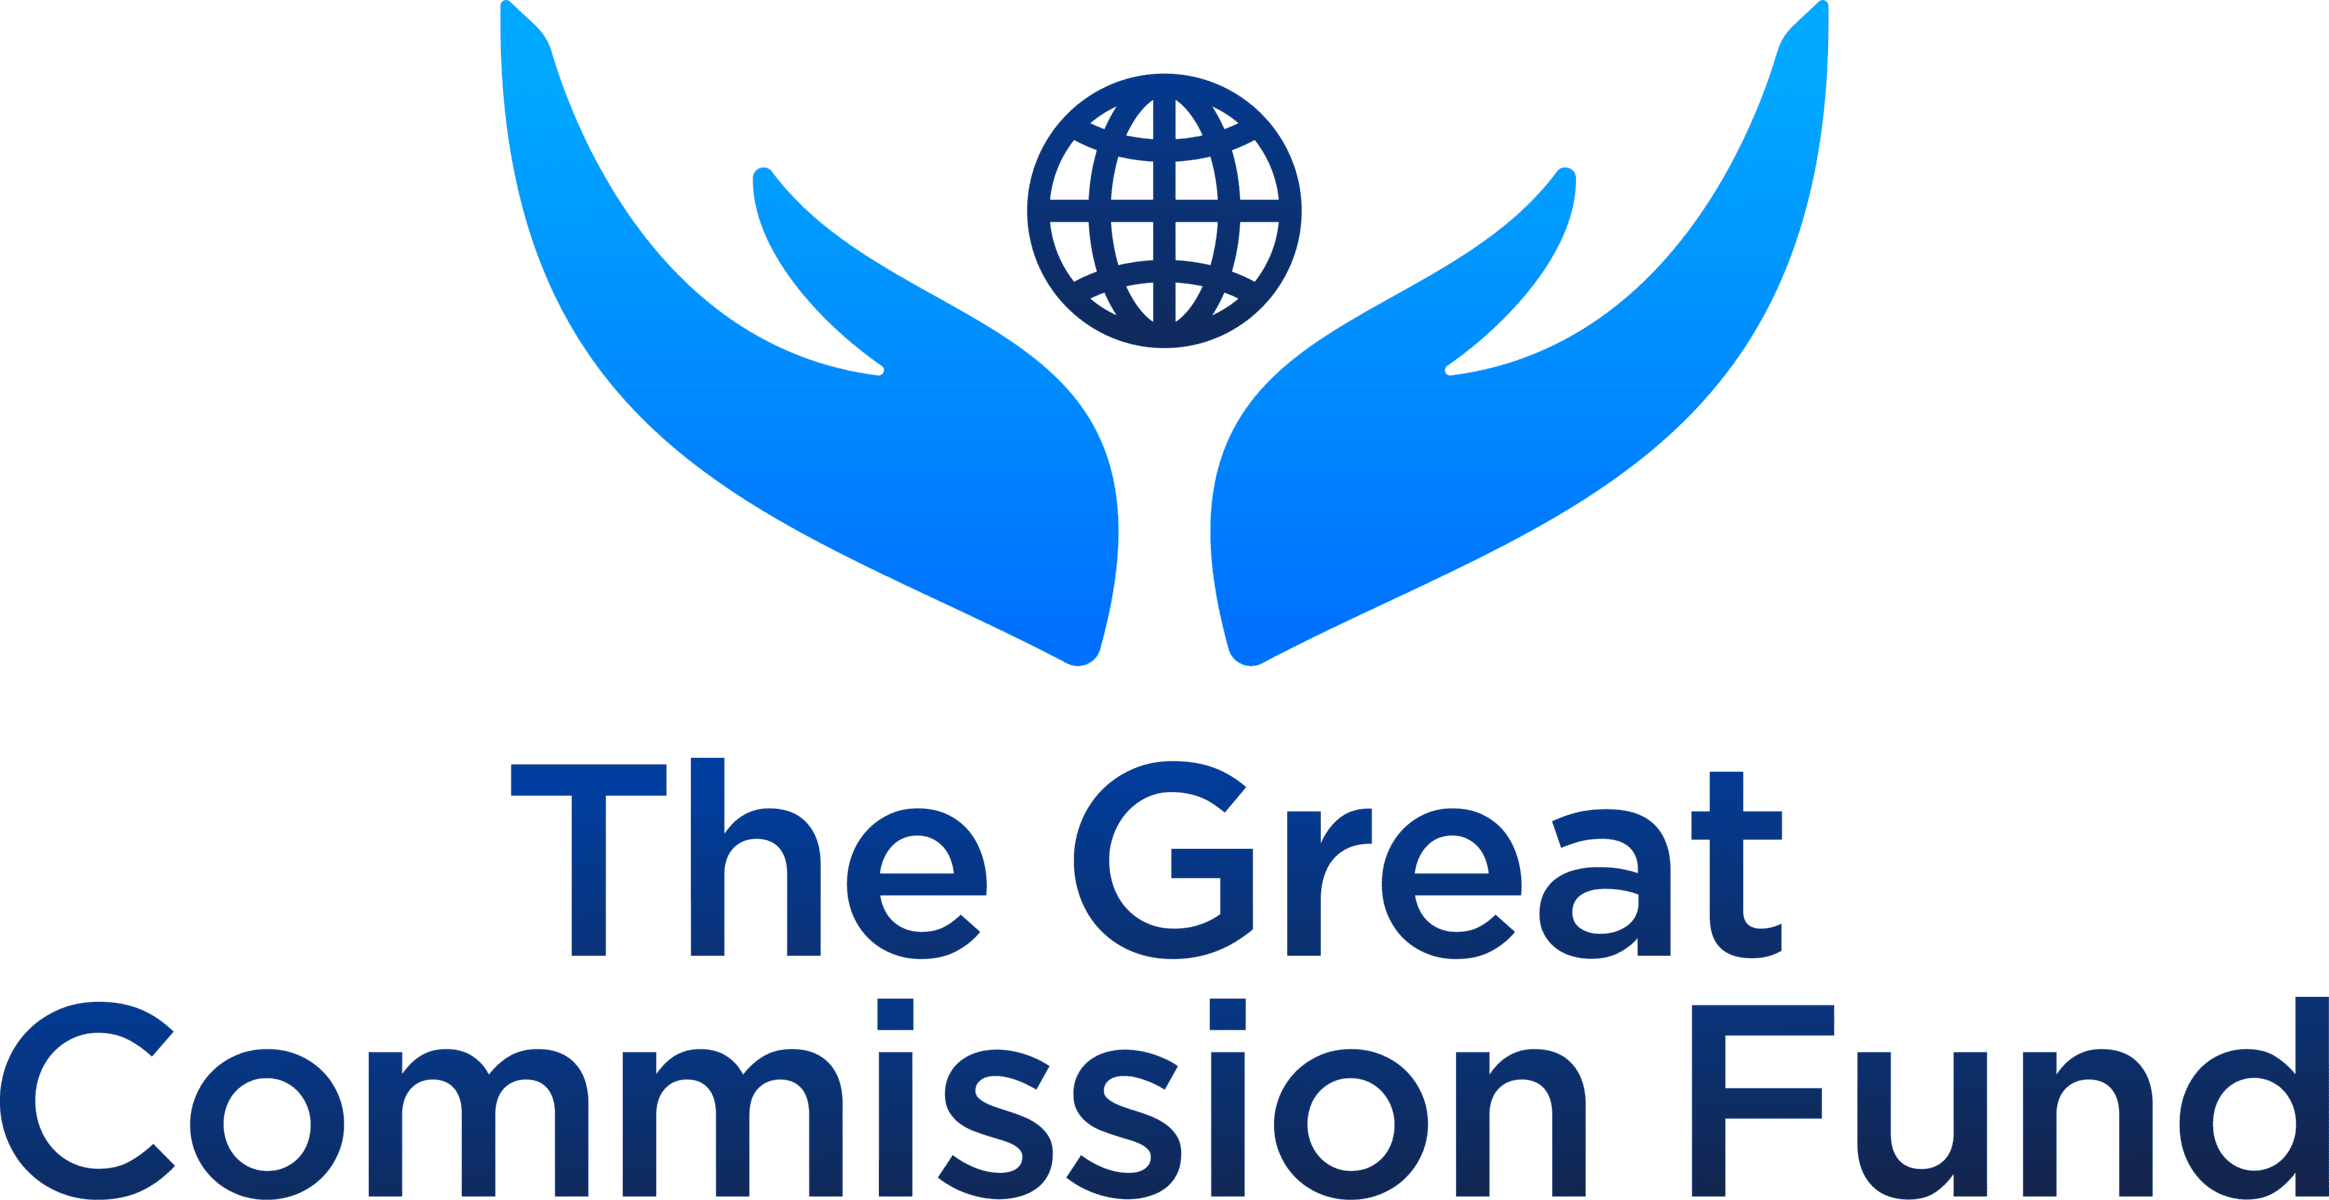 The Great Commission Fund